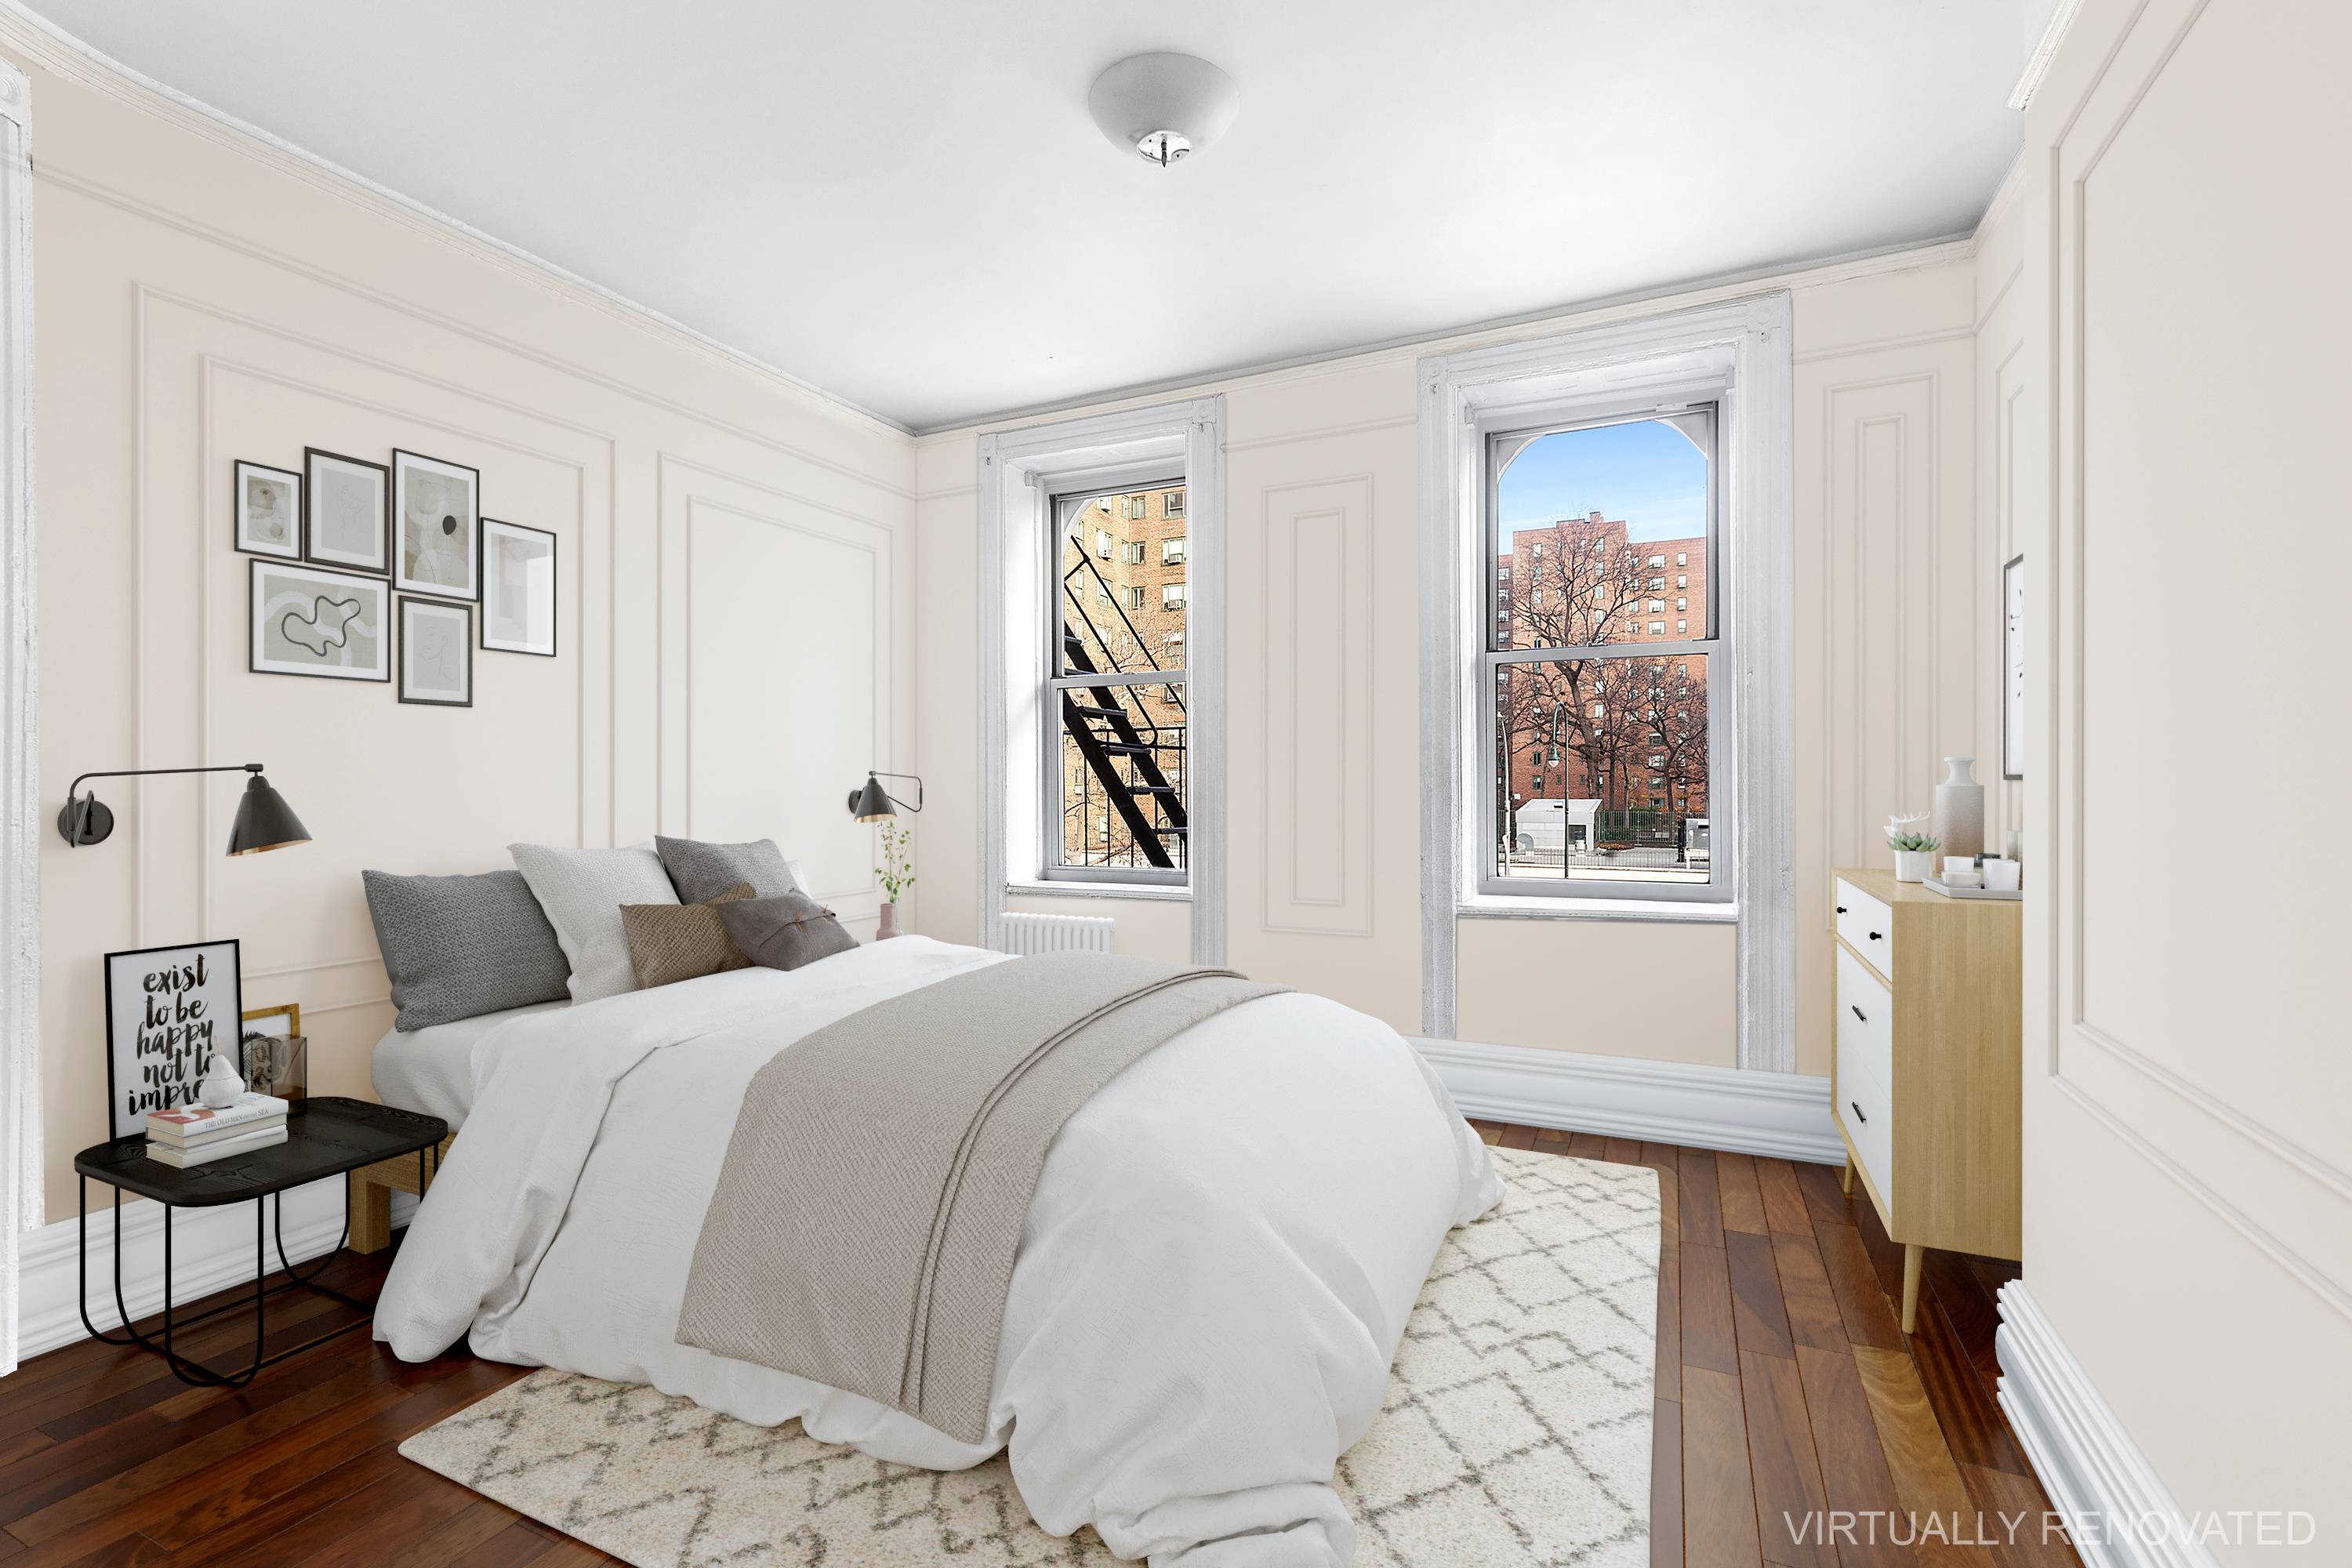 New to the market ! Peaceful and welcoming, this sweet one bedroom apartment in the heart of the East Village is full of old world charm.